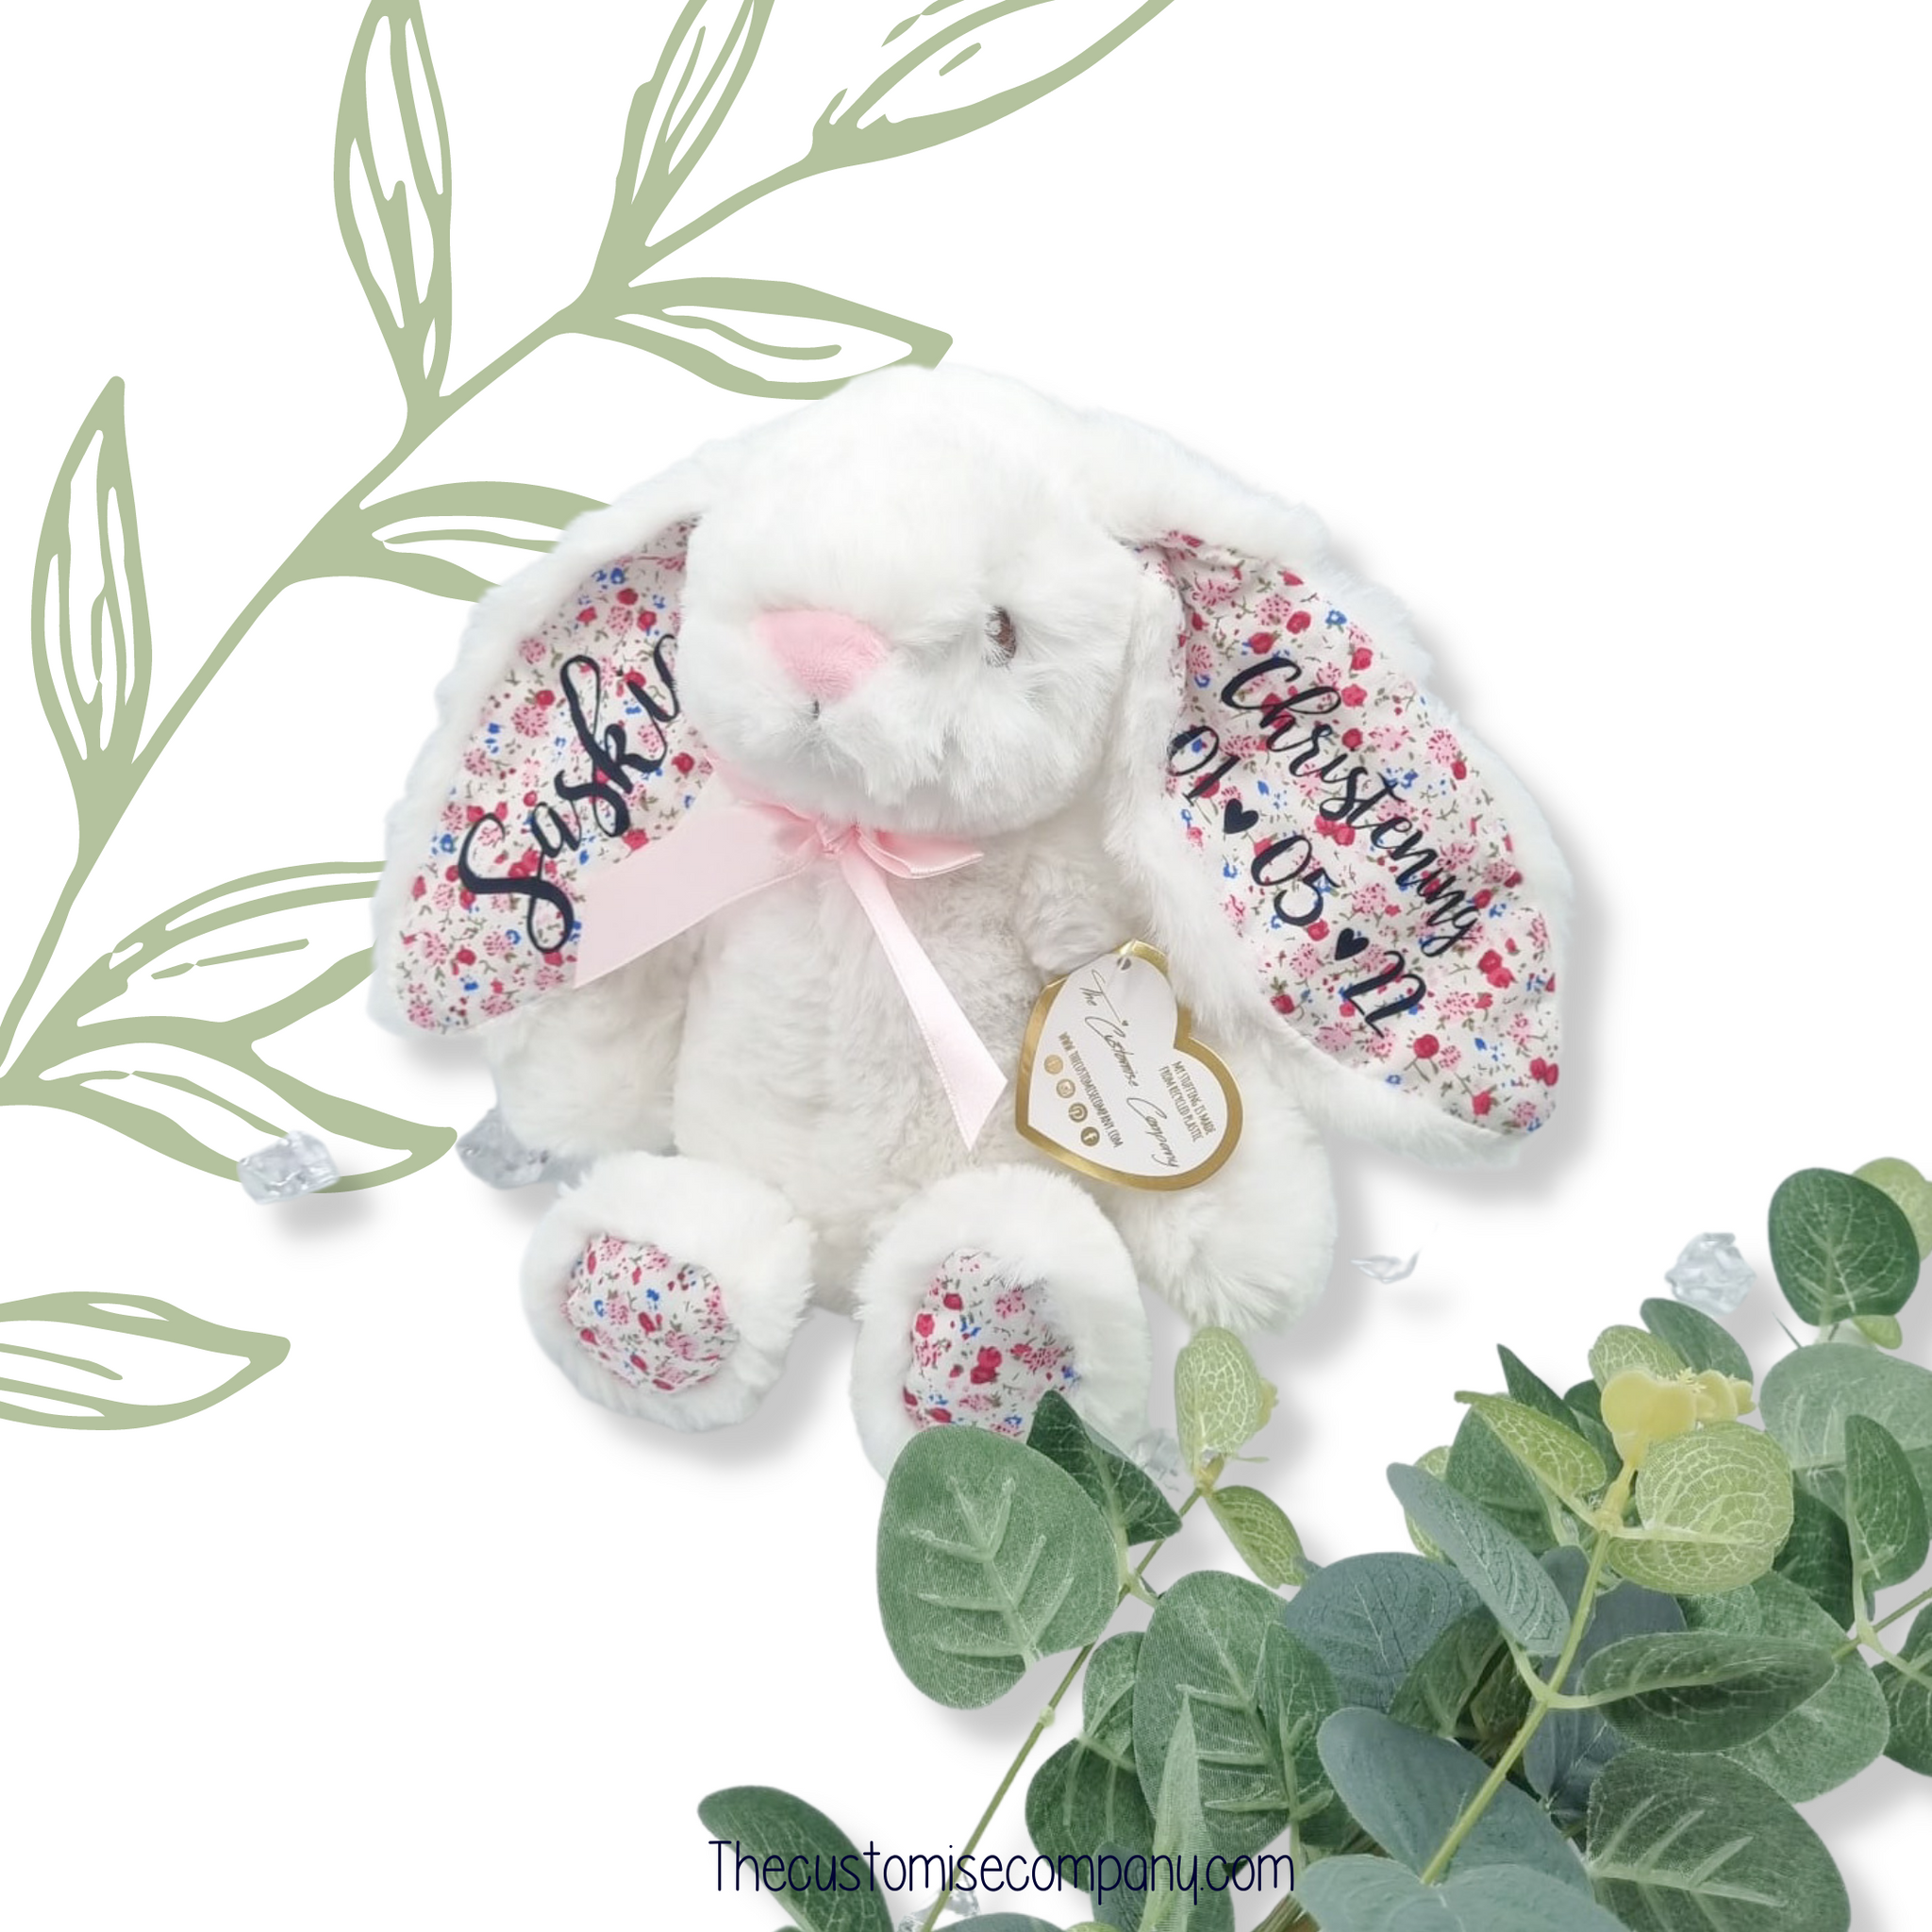 Super cute fluffy white teddy bunny with floral inner ears and black vinyl personalisation